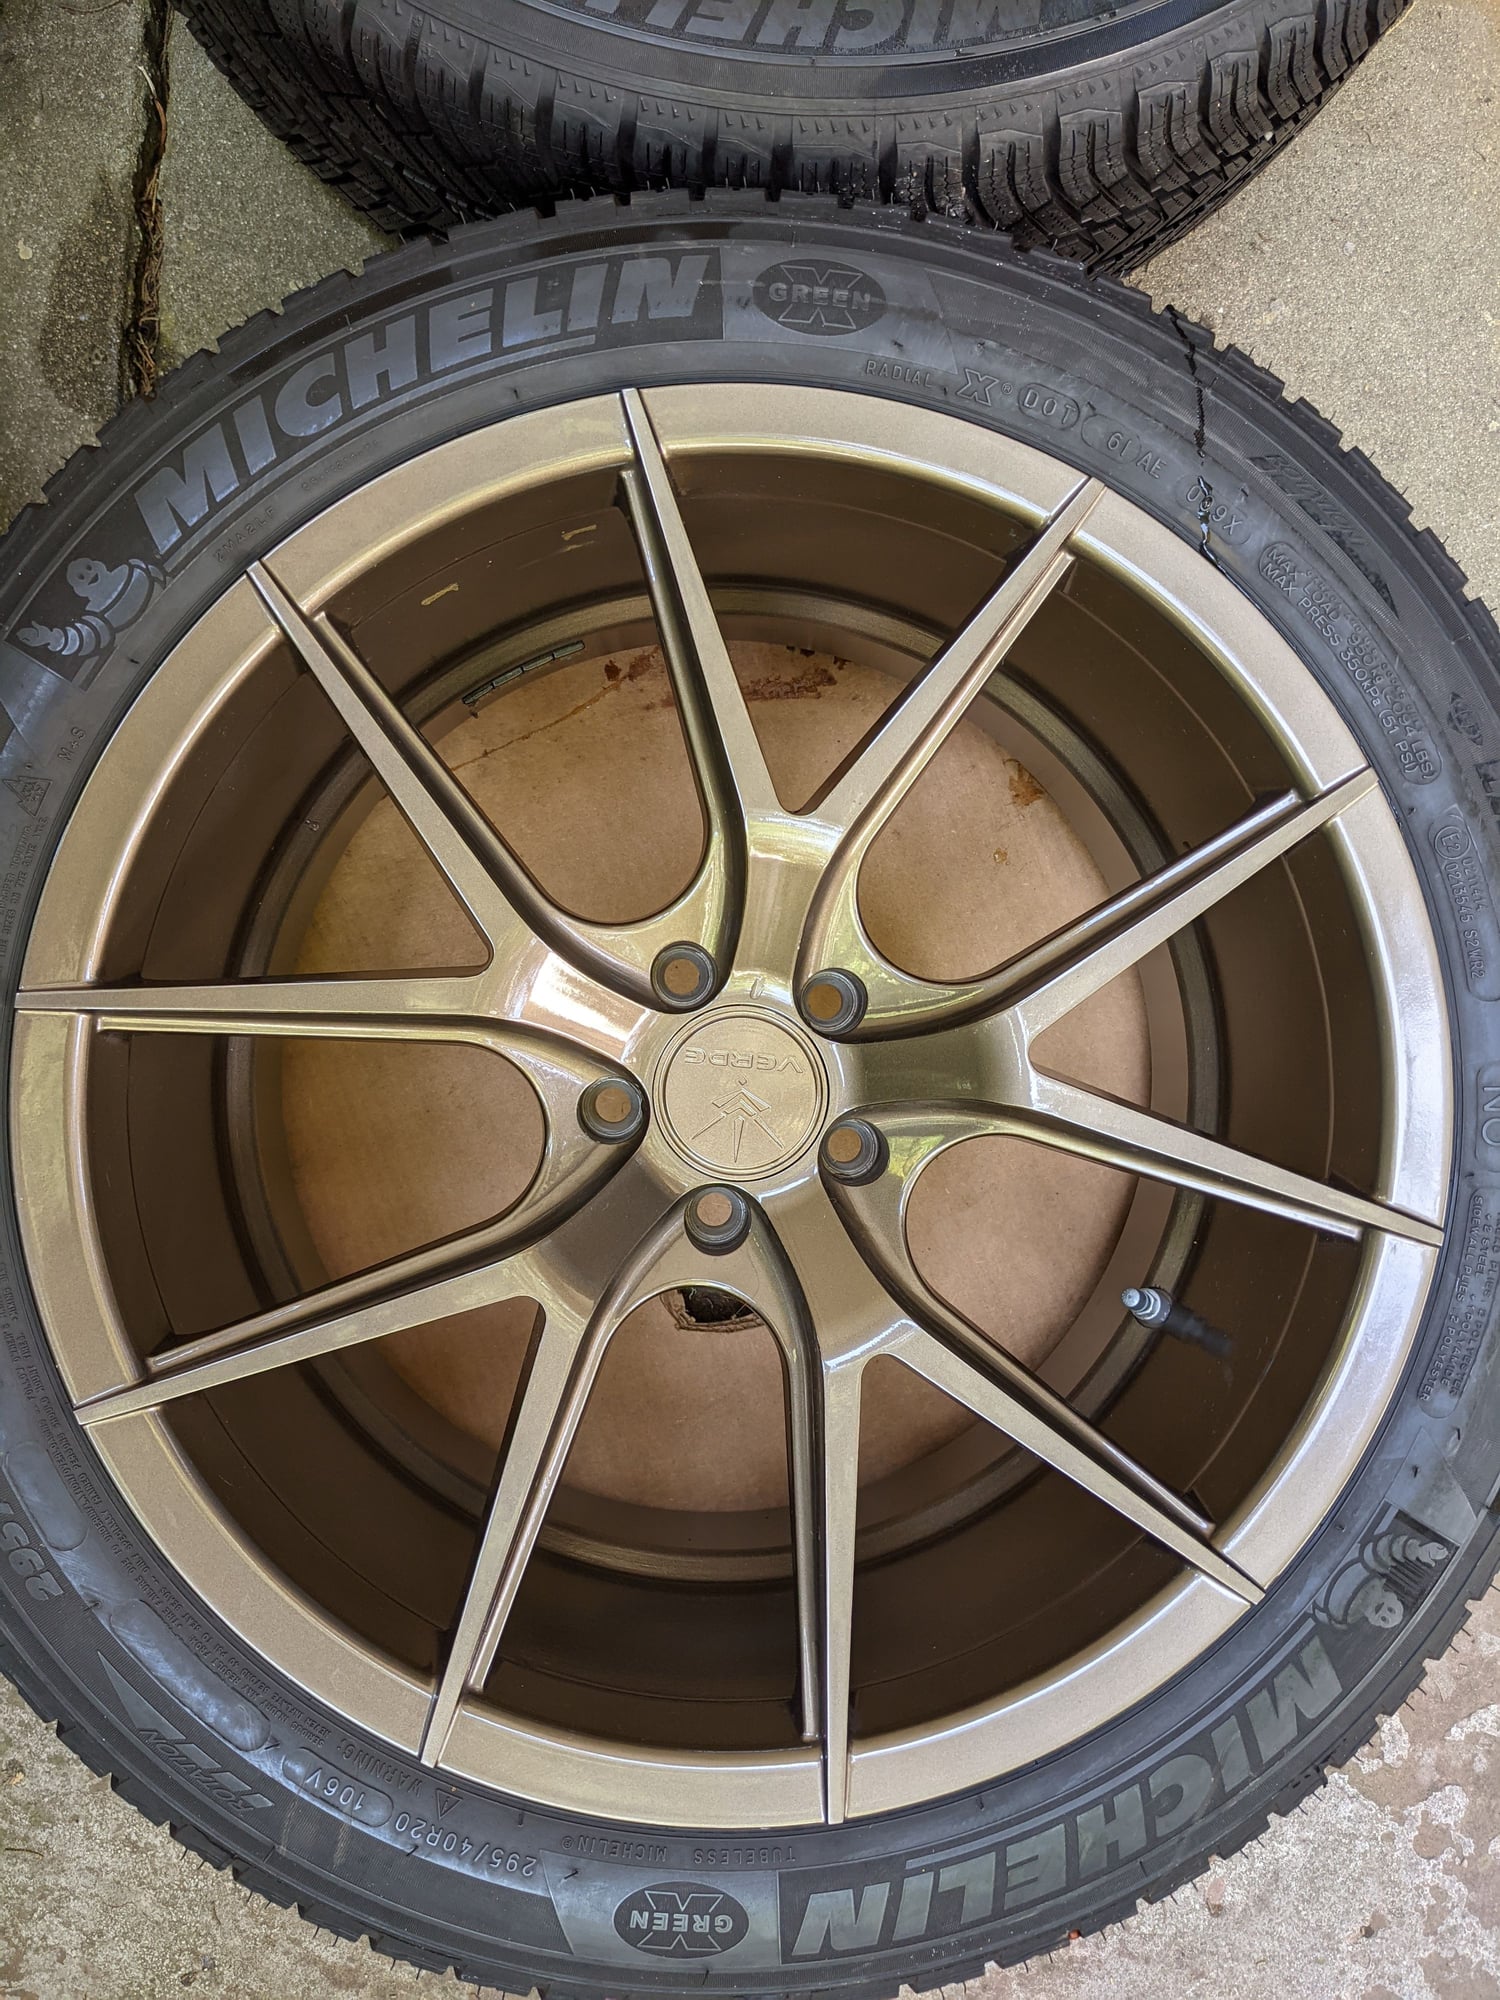 Wheels and Tires/Axles - Porsche Macan Winter Snow Wheels + Tires - N0 rated (Also Fit Audi Q5/SQ5) - Used - 2014 to 2021 Porsche Macan - 2008 to 2021 Audi SQ5 - 2008 to 2021 Audi Q5 - Pebble Beach, CA 93953, United States